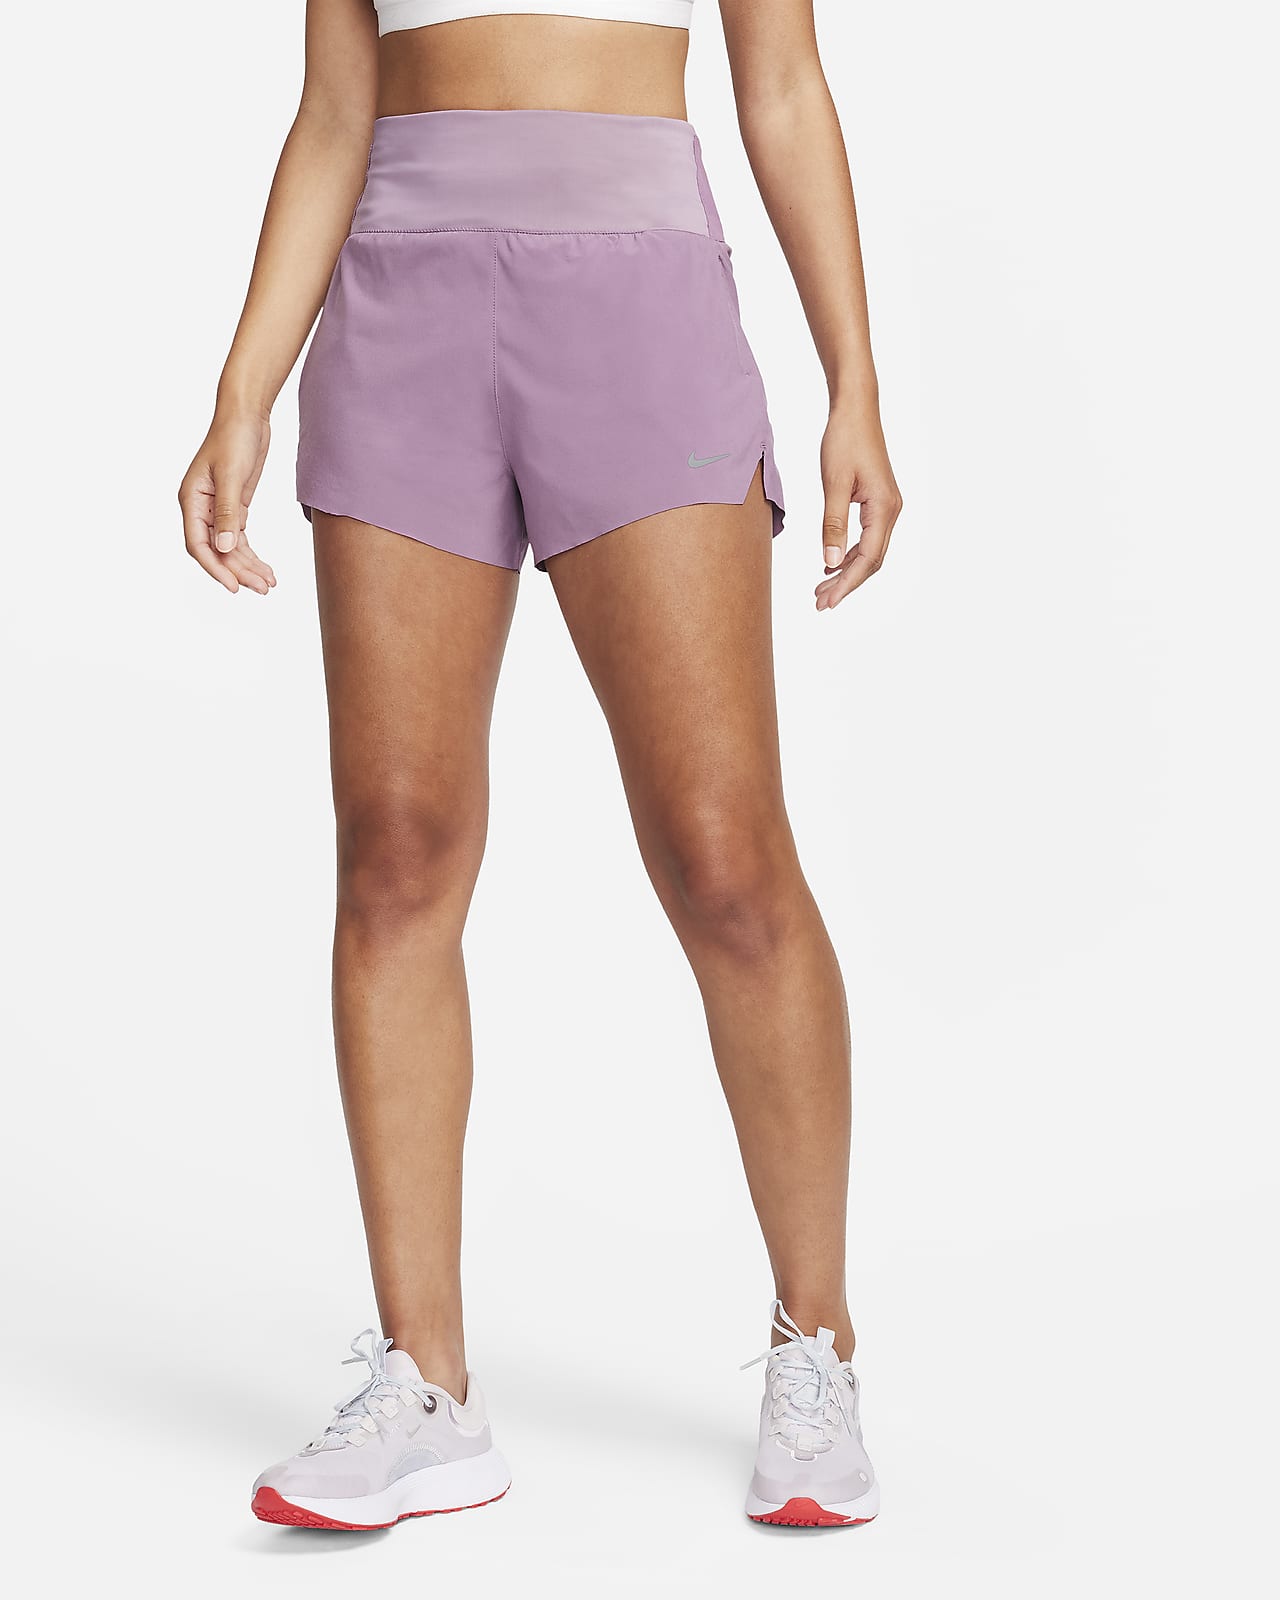 https://static.nike.com/a/images/t_PDP_1280_v1/f_auto,q_auto:eco/8866aef9-4fb5-42ac-91e8-9ec72681bff9/dri-fit-swift-womens-high-waisted-3-brief-lined-running-shorts-PkpjjT.png